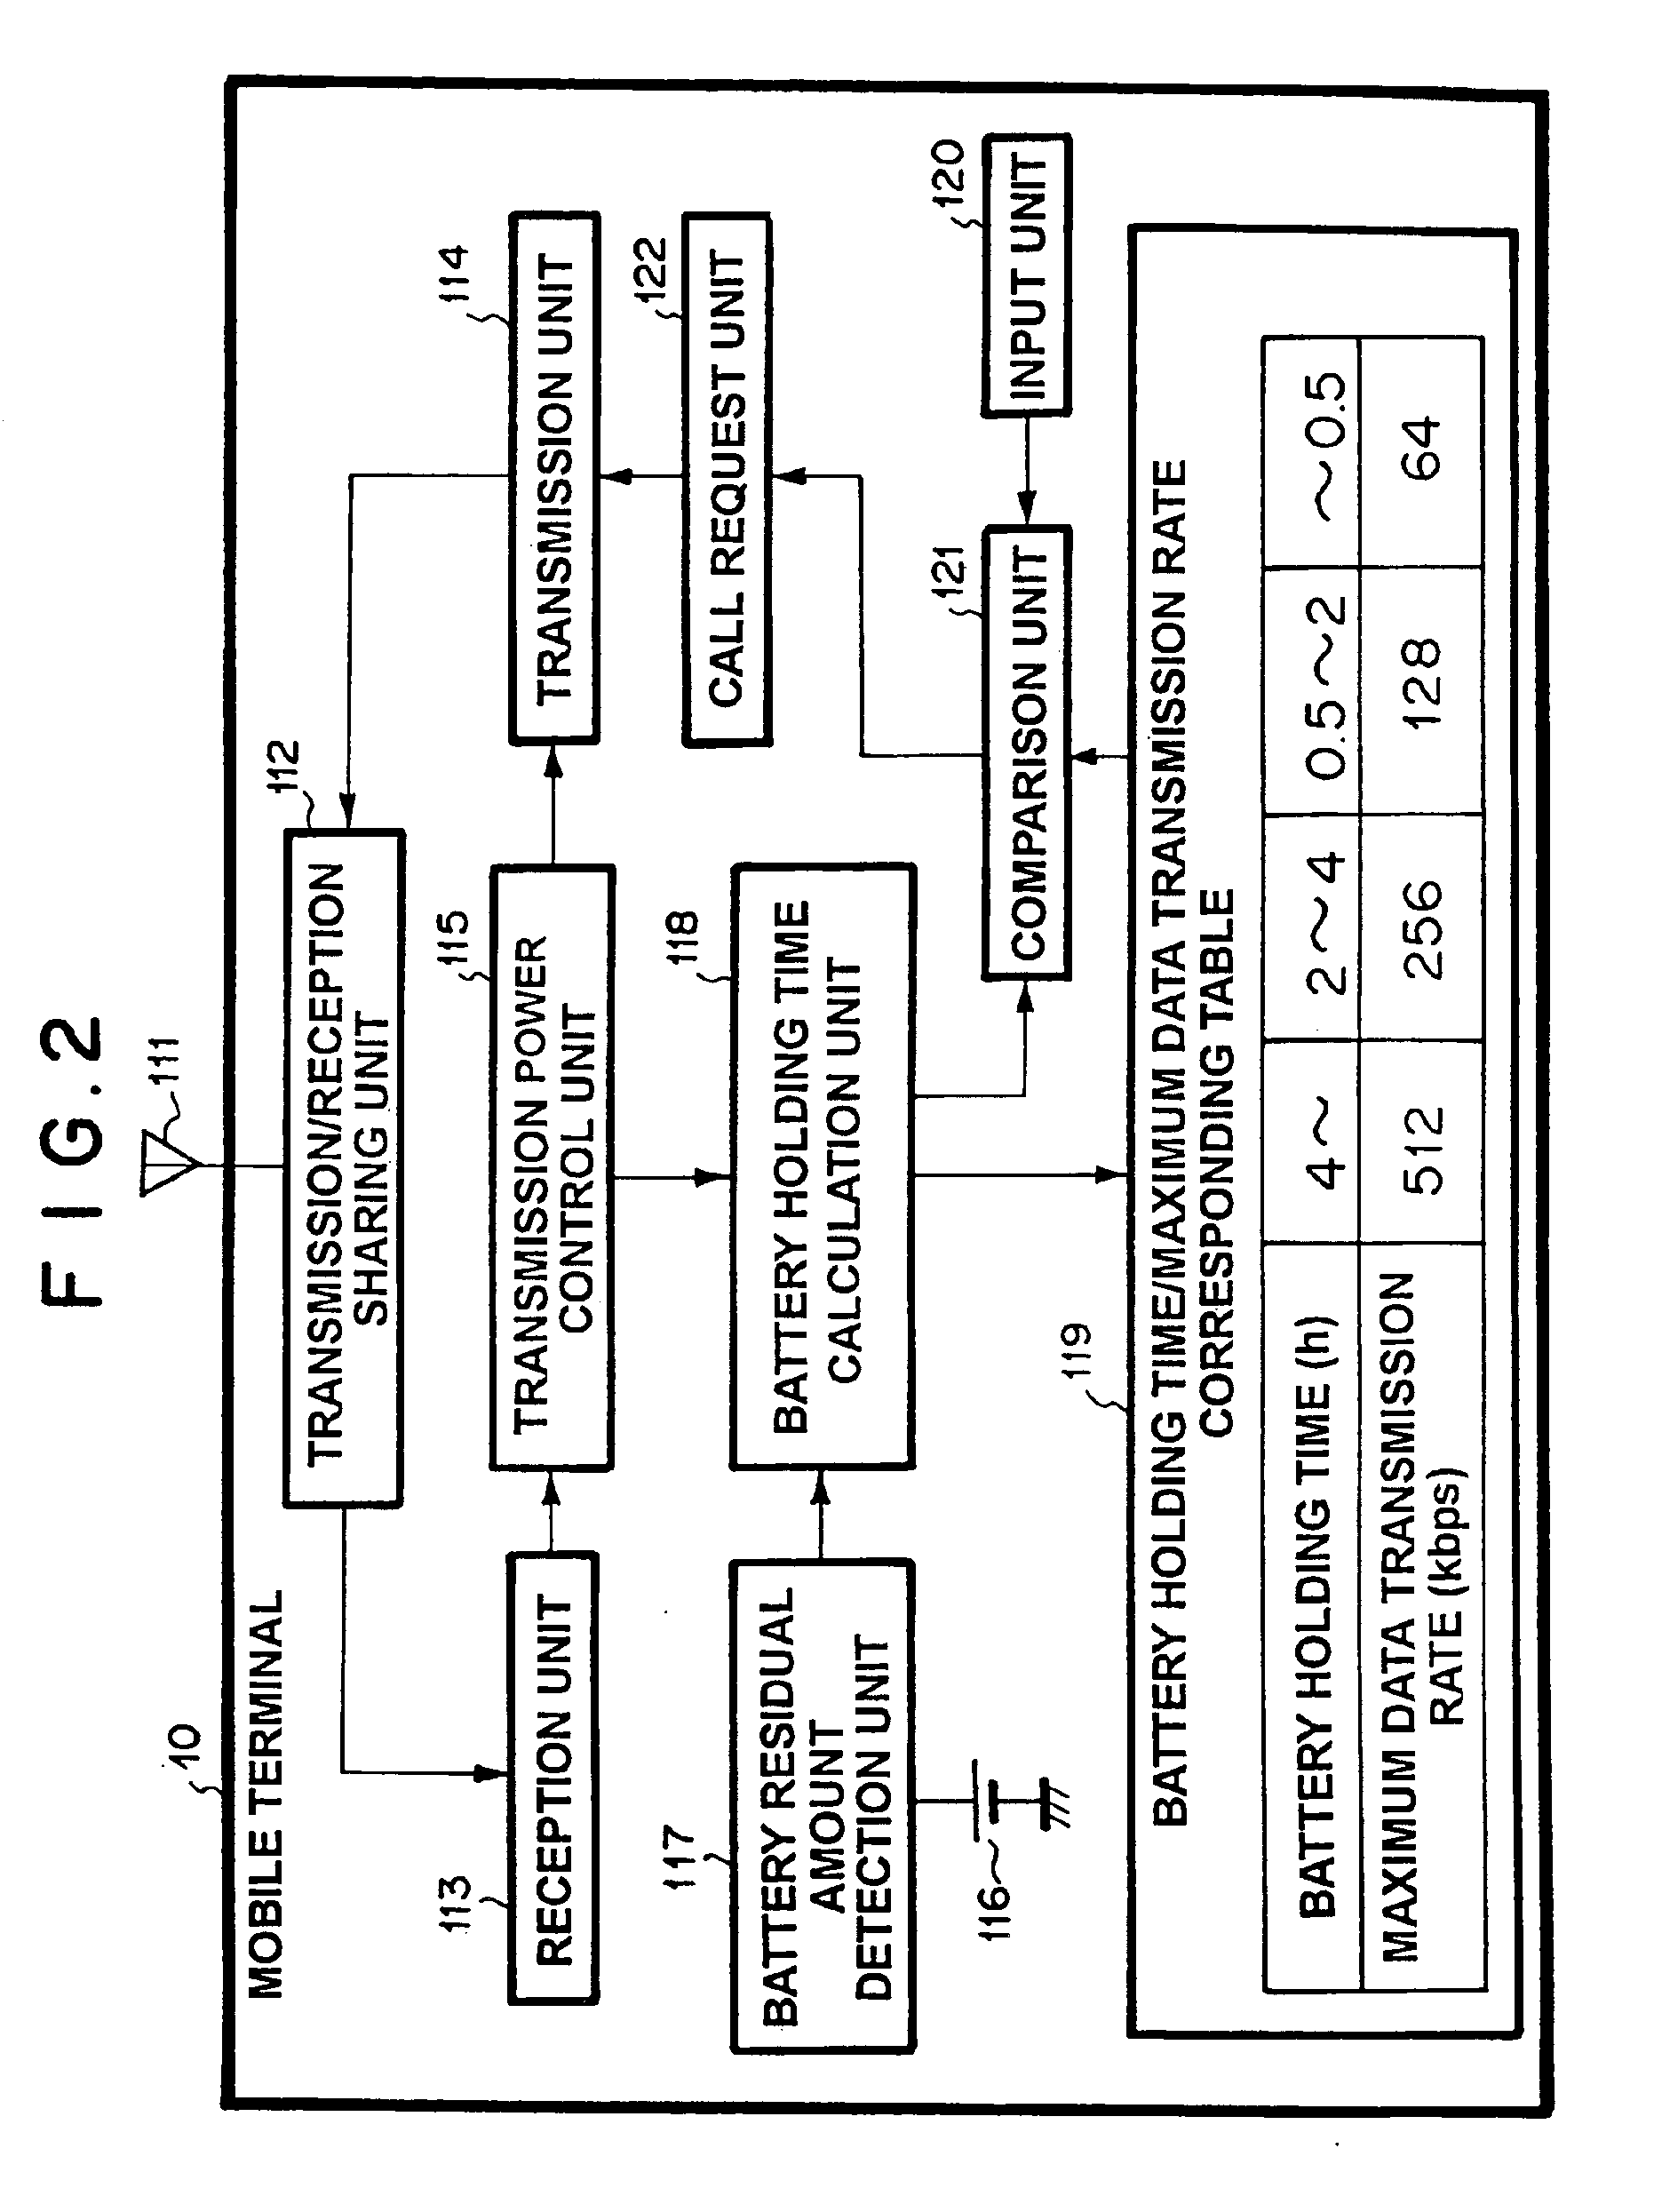 Mobile terminal, mobile communication system, and power consumption suppressing method for mobile terminal